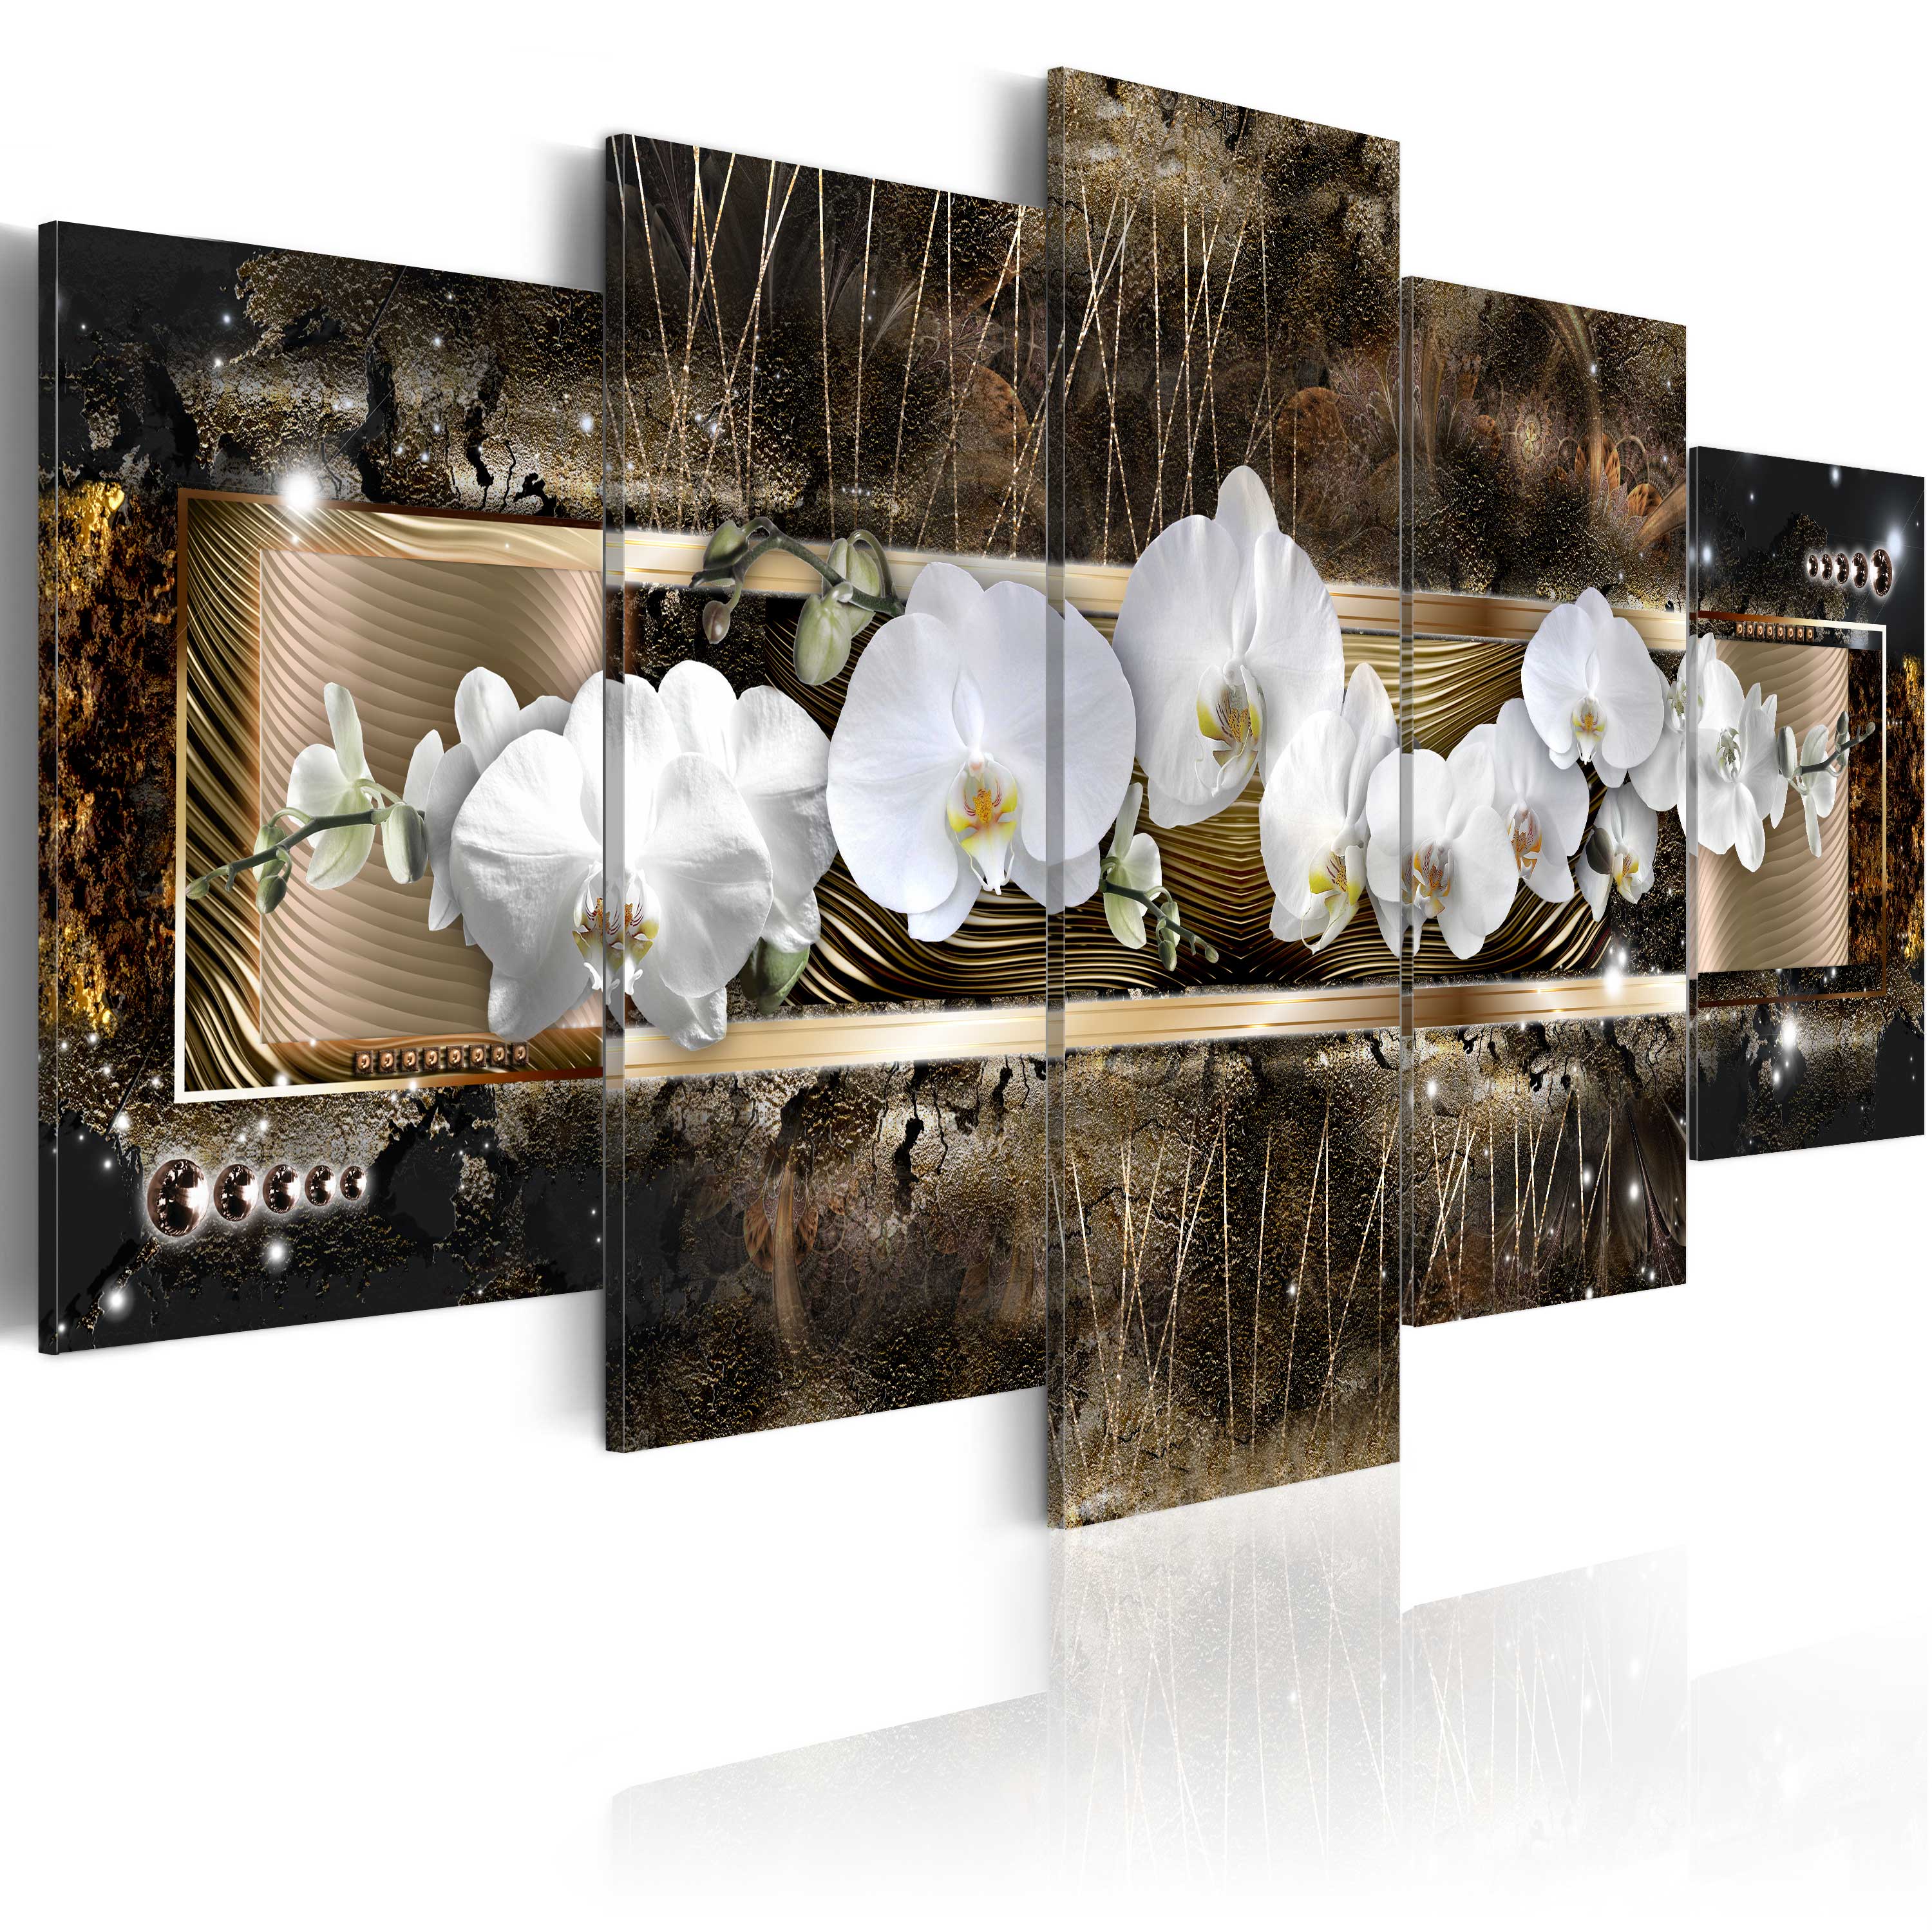 Canvas Print - The dream of a orchids - 100x50